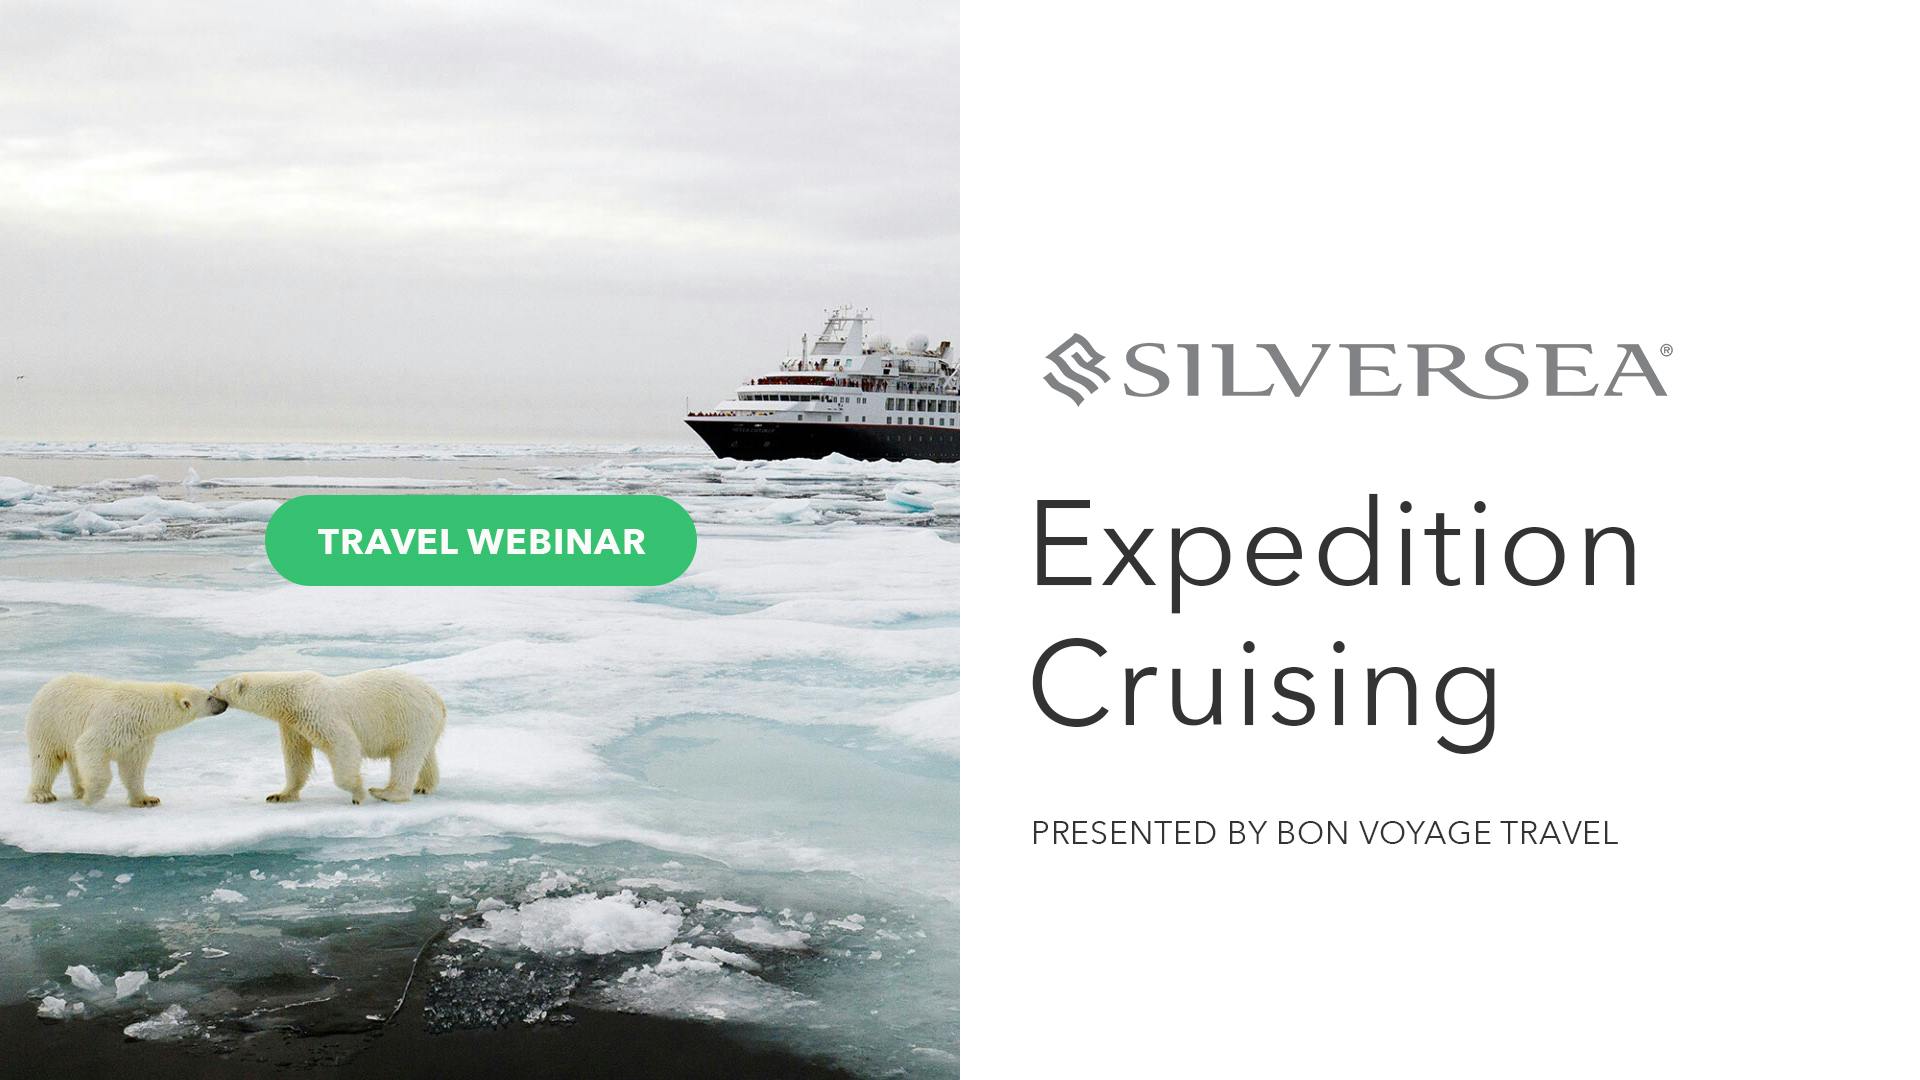 Expedition Cruising with Silversea